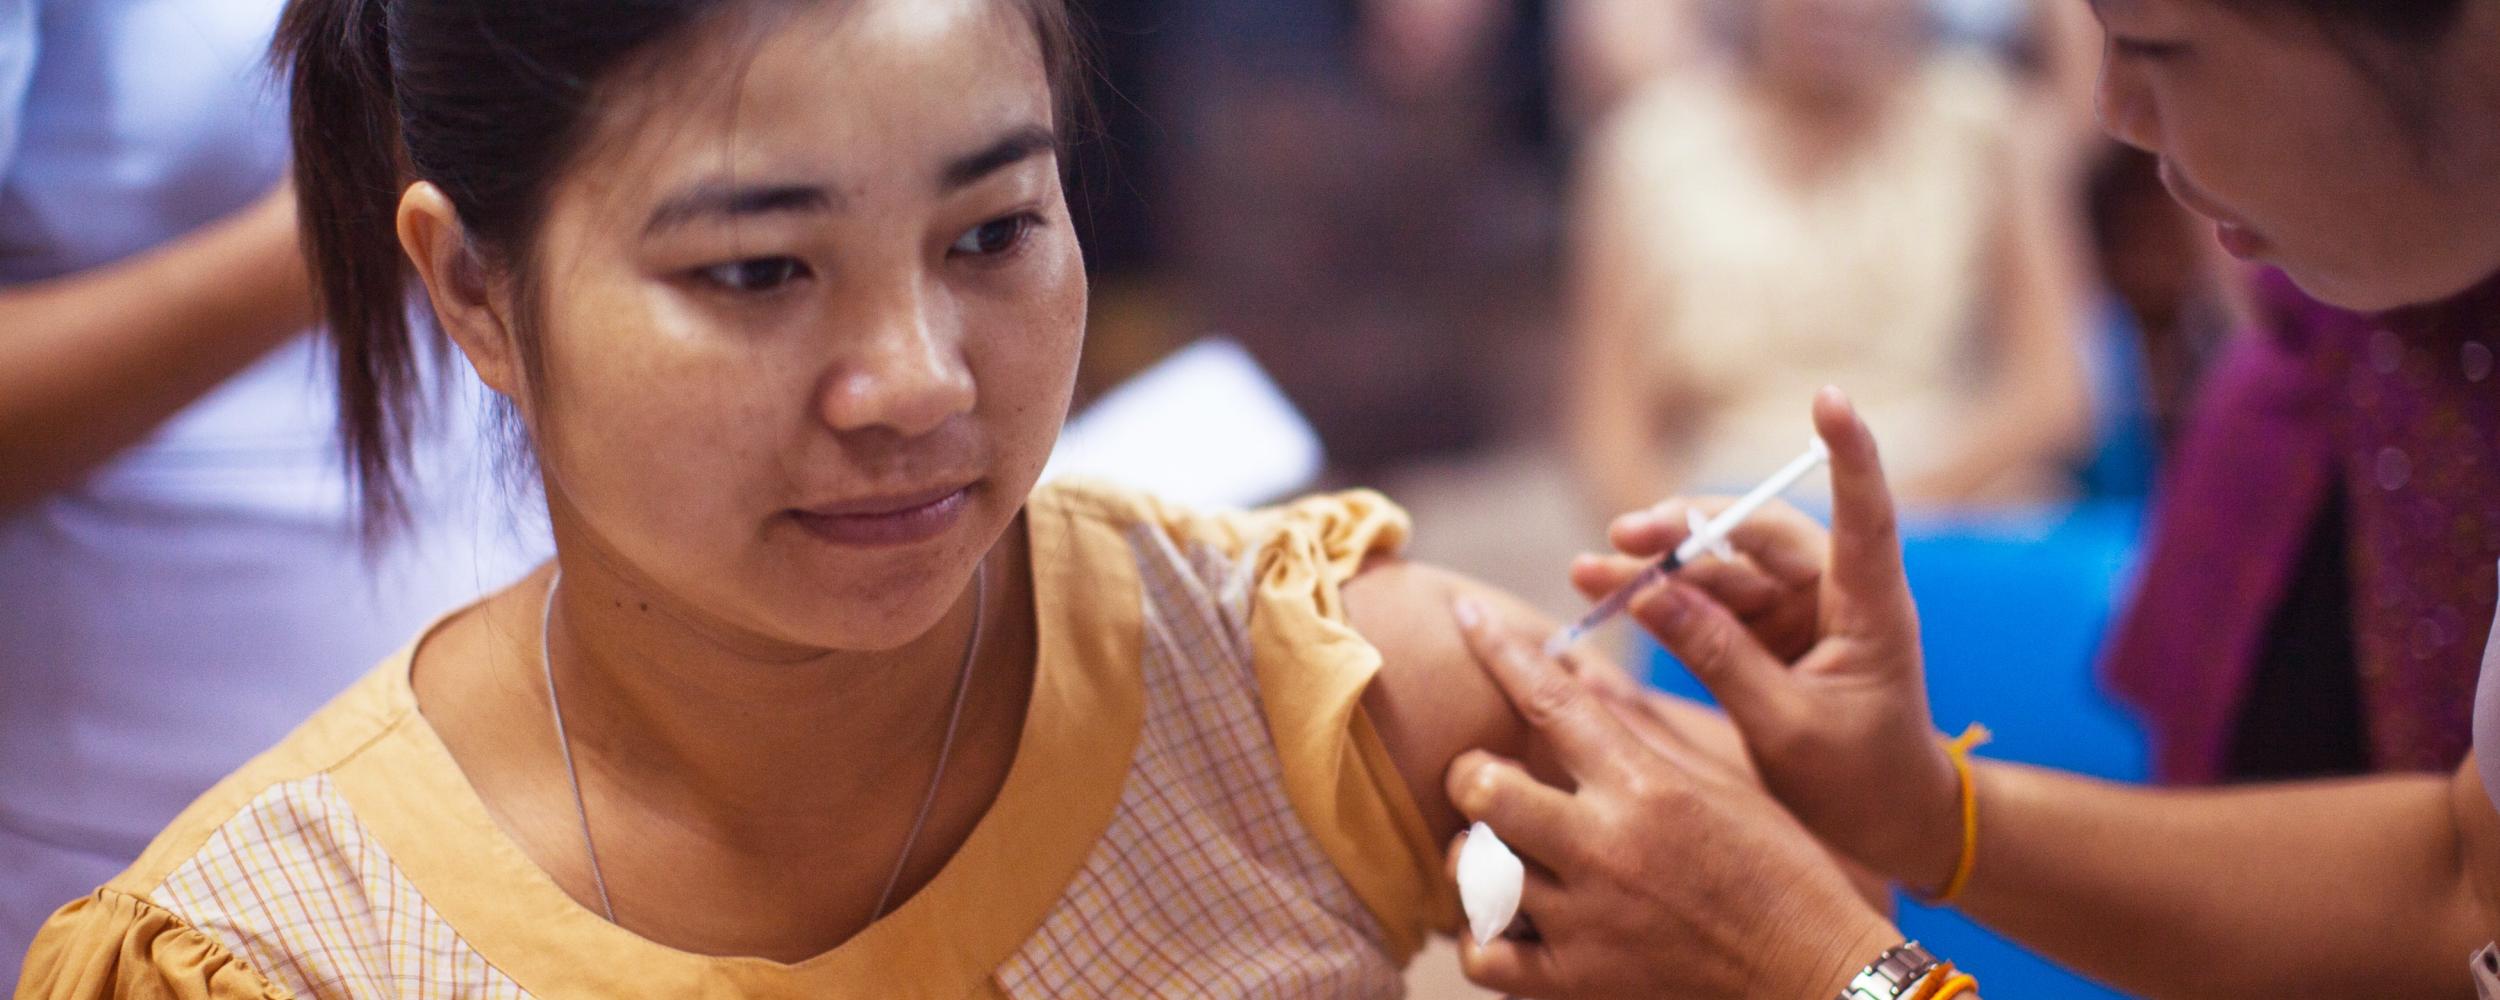 Teen receiving injection of COVID-19 Vaccine. Photo by CDC on Unsplash